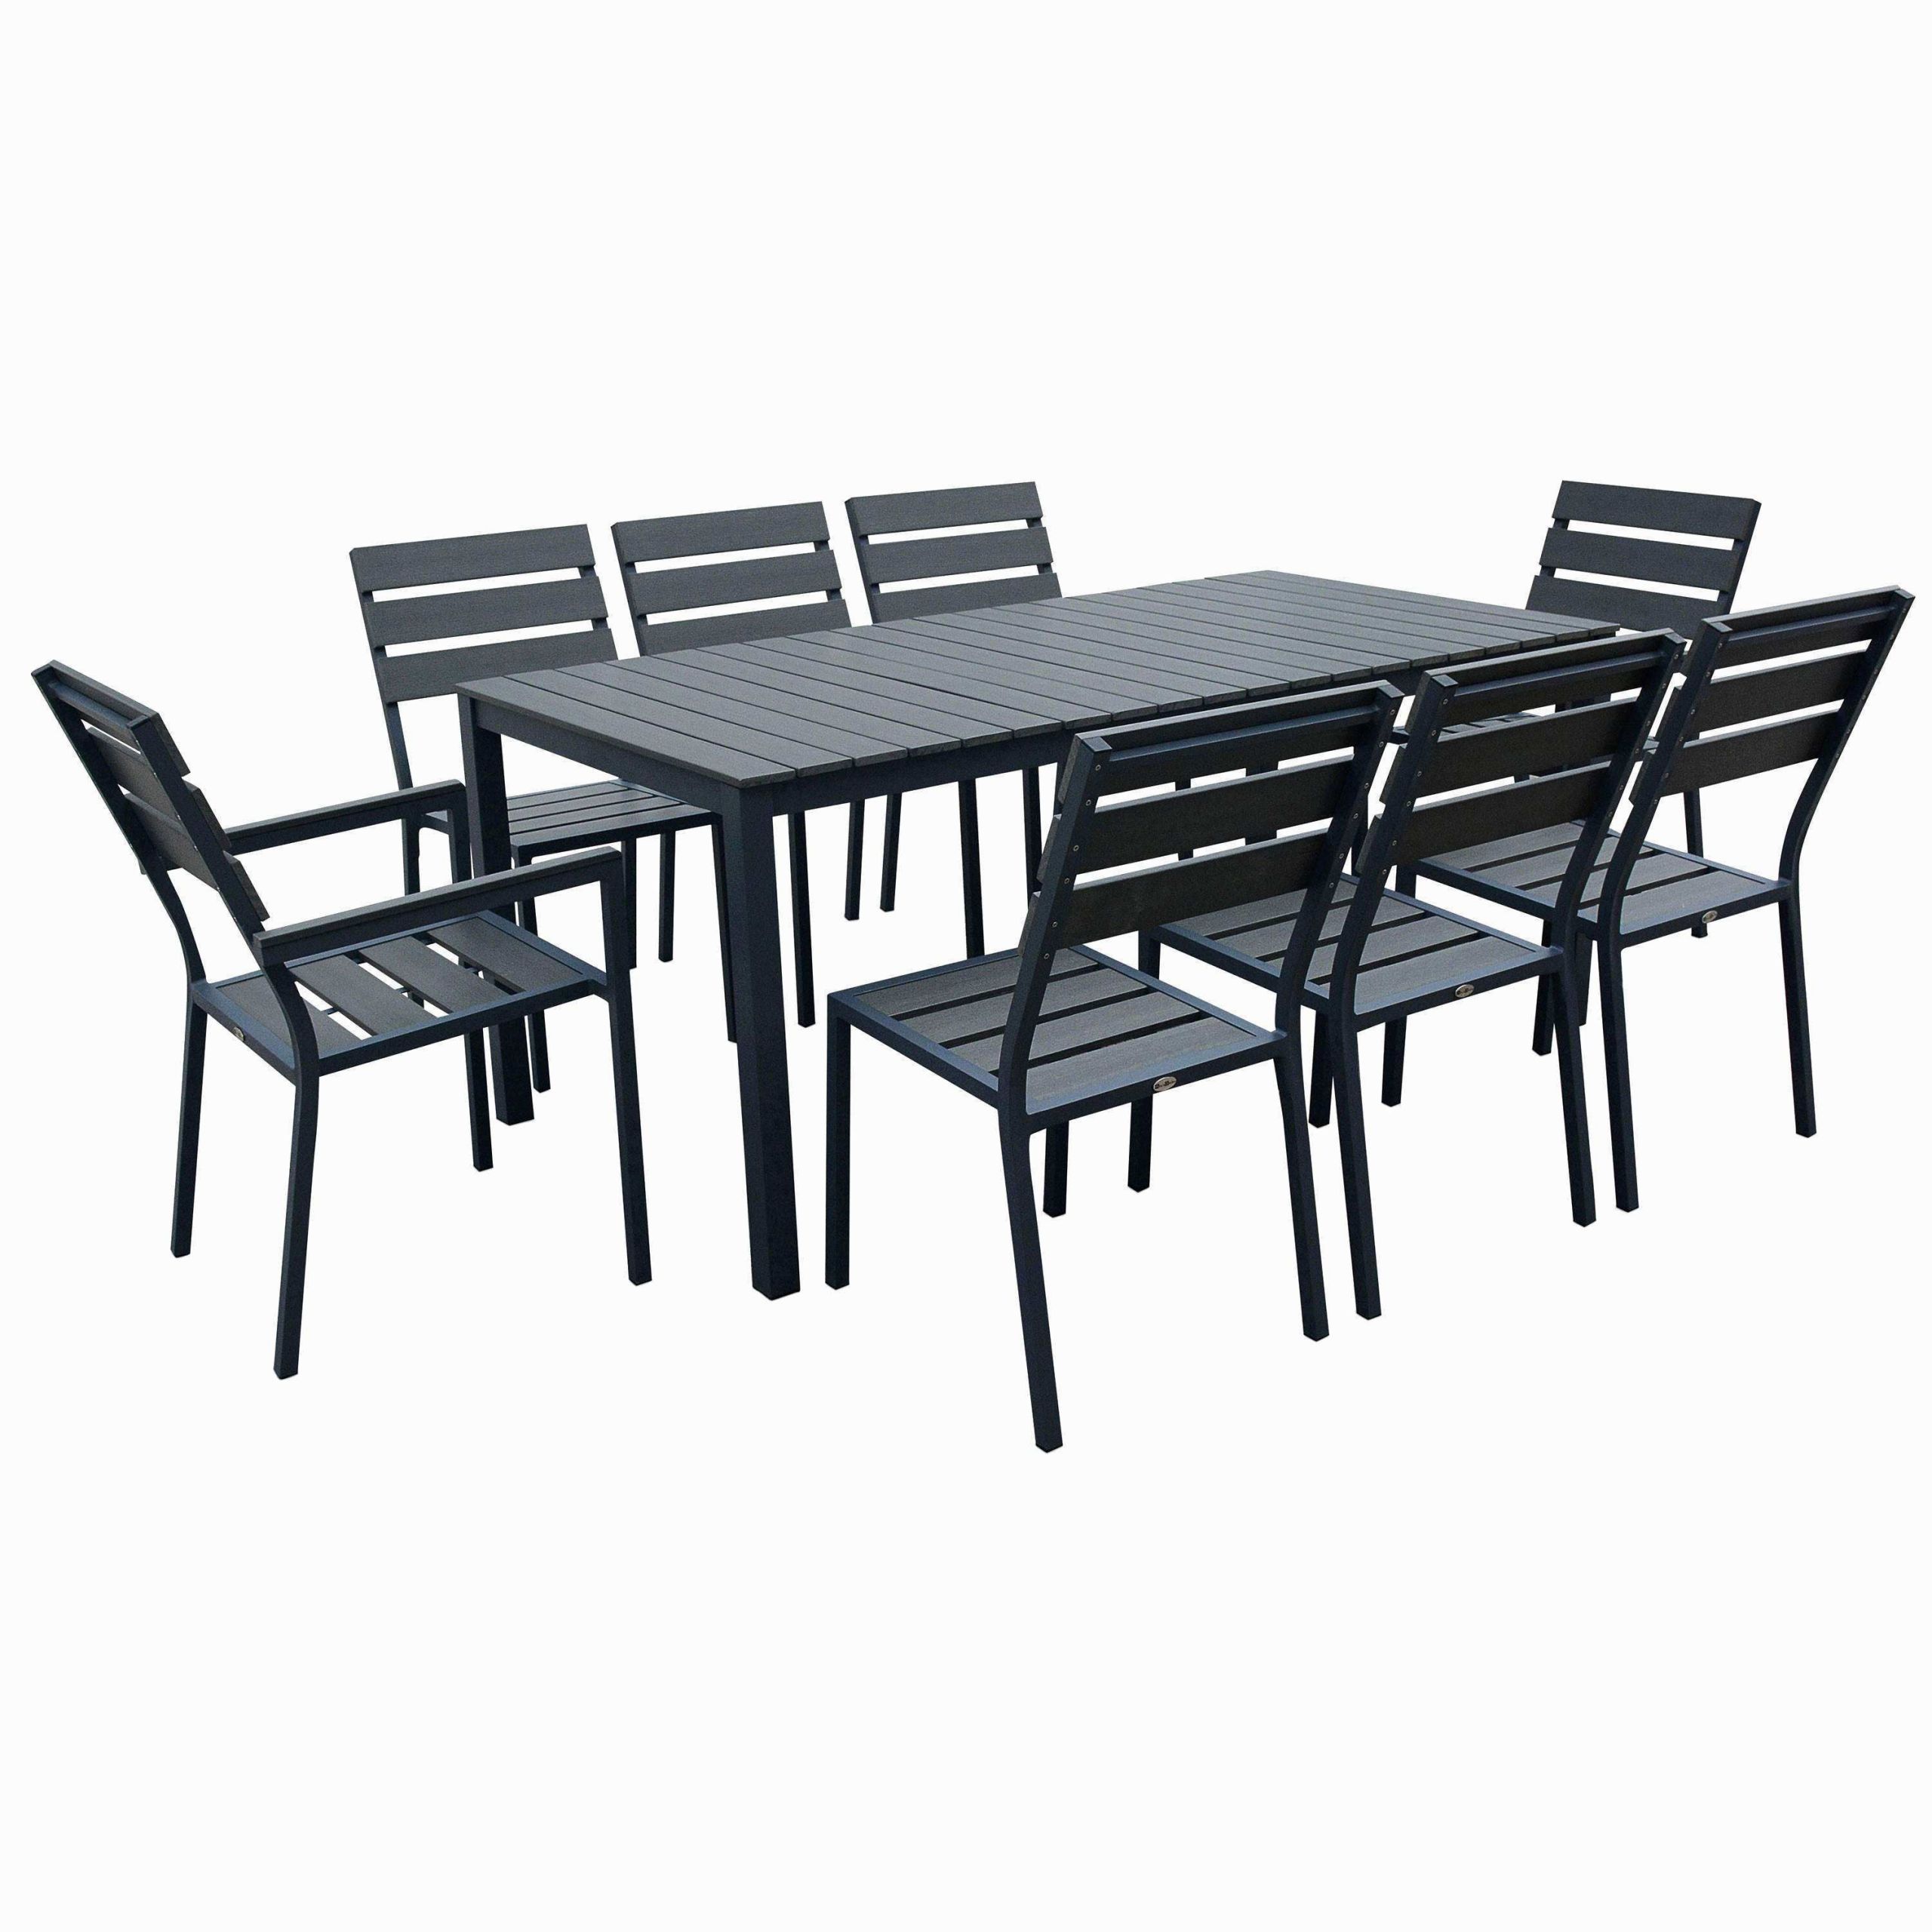 table de jardin gris anthracite genial table terrasse pas cher de table de jardin gris anthracite scaled